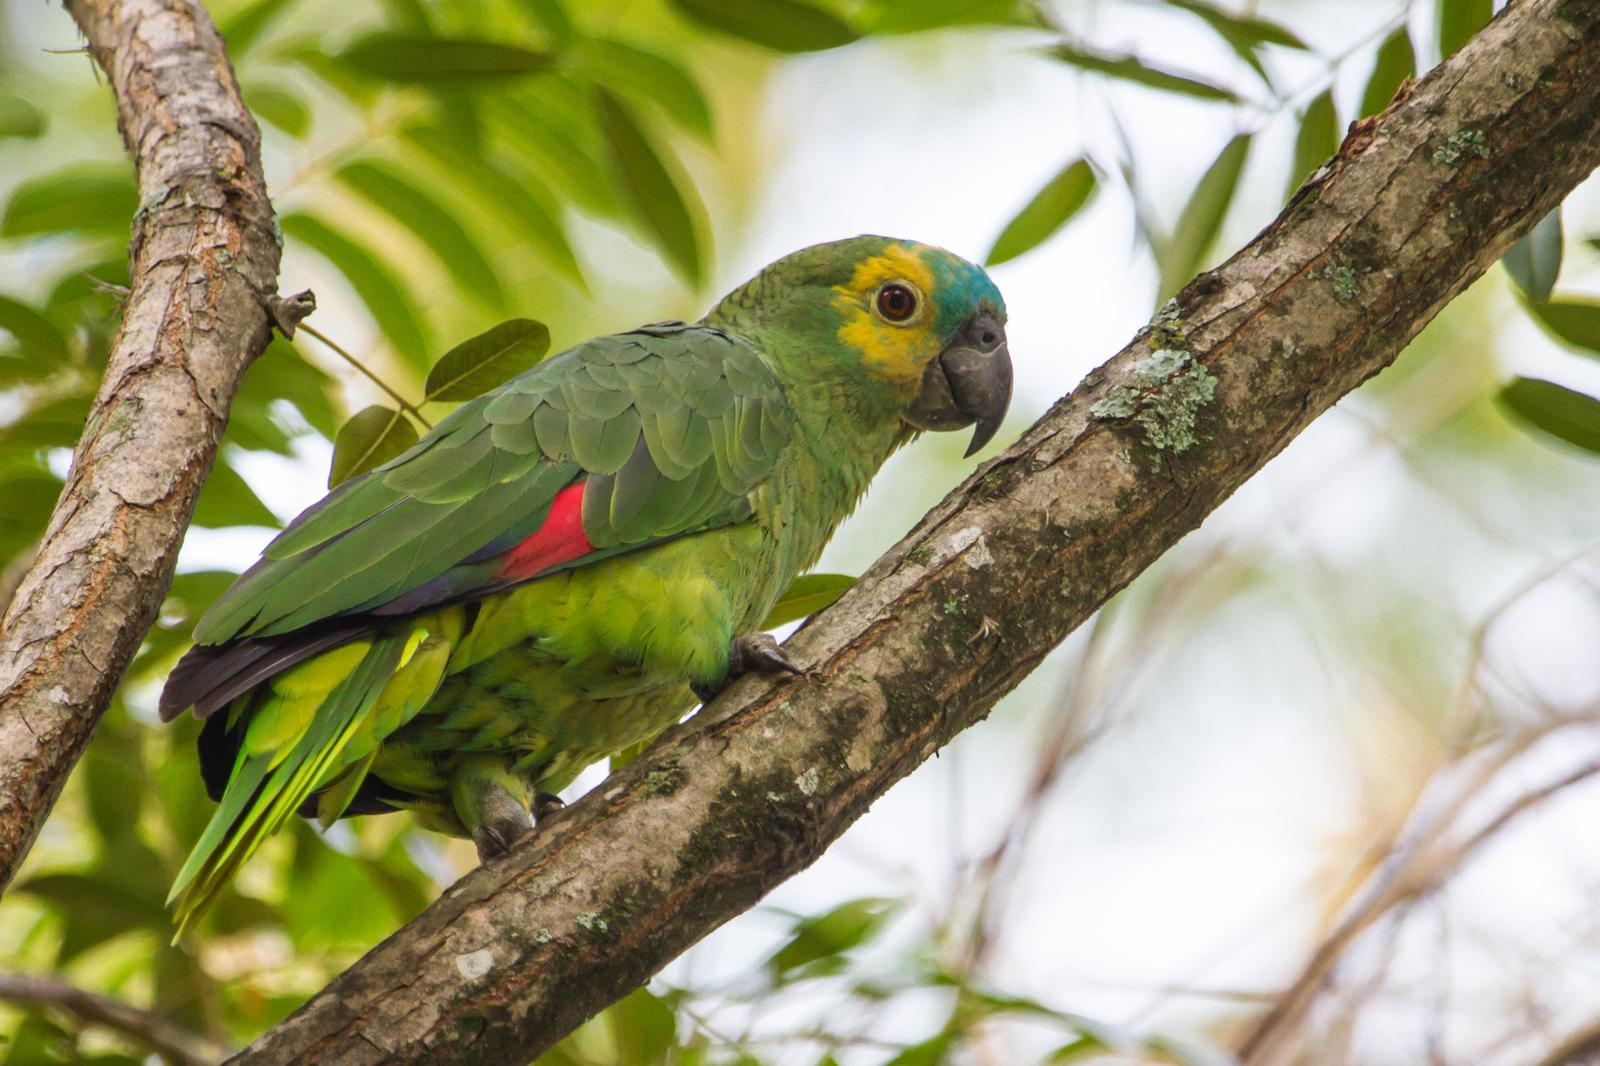 Turquoise-fronted Parrot Photo by Zé Edu Camargo